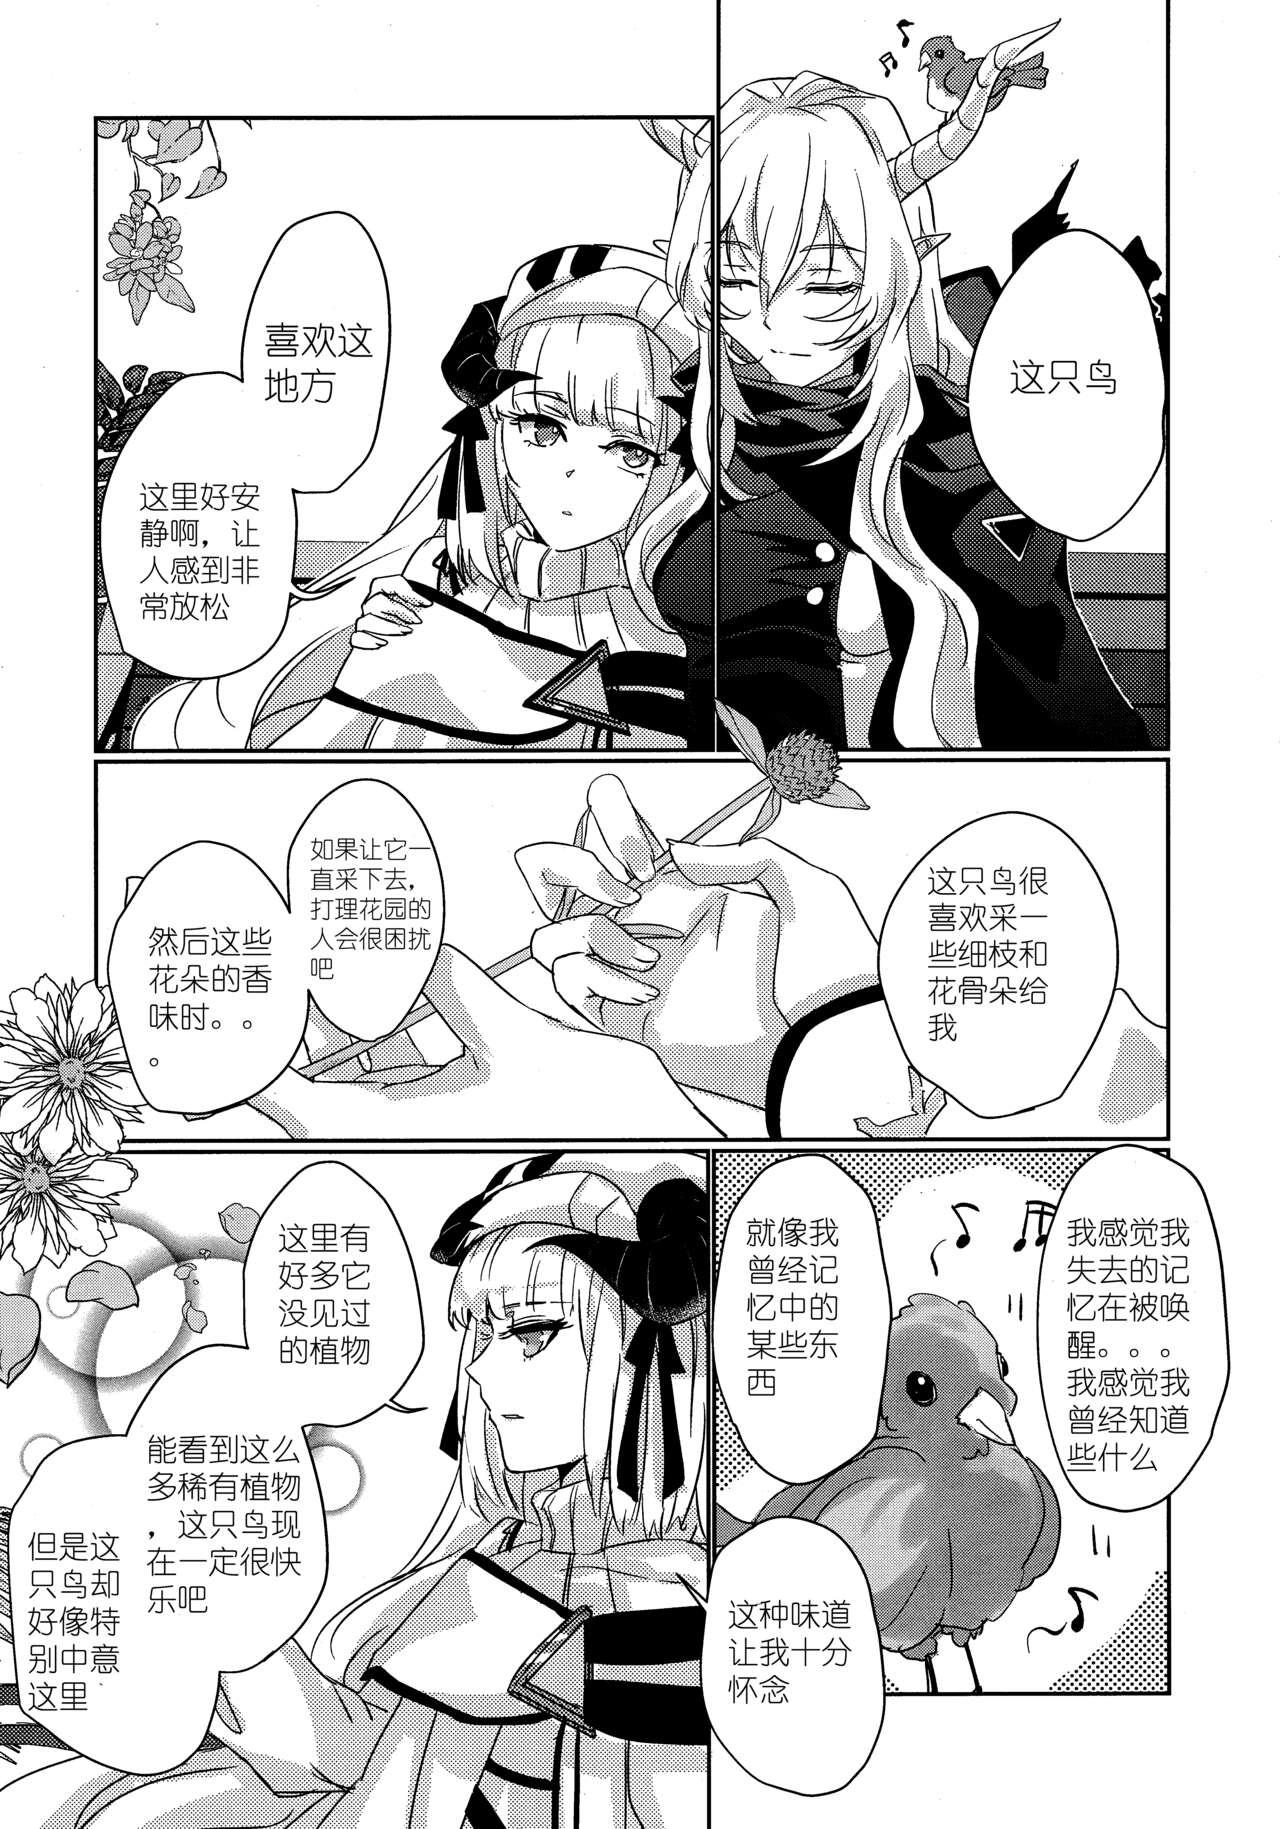 Gagging empty | 天赐吾爱·夜灵佳人 - Arknights Sex Party - Page 8